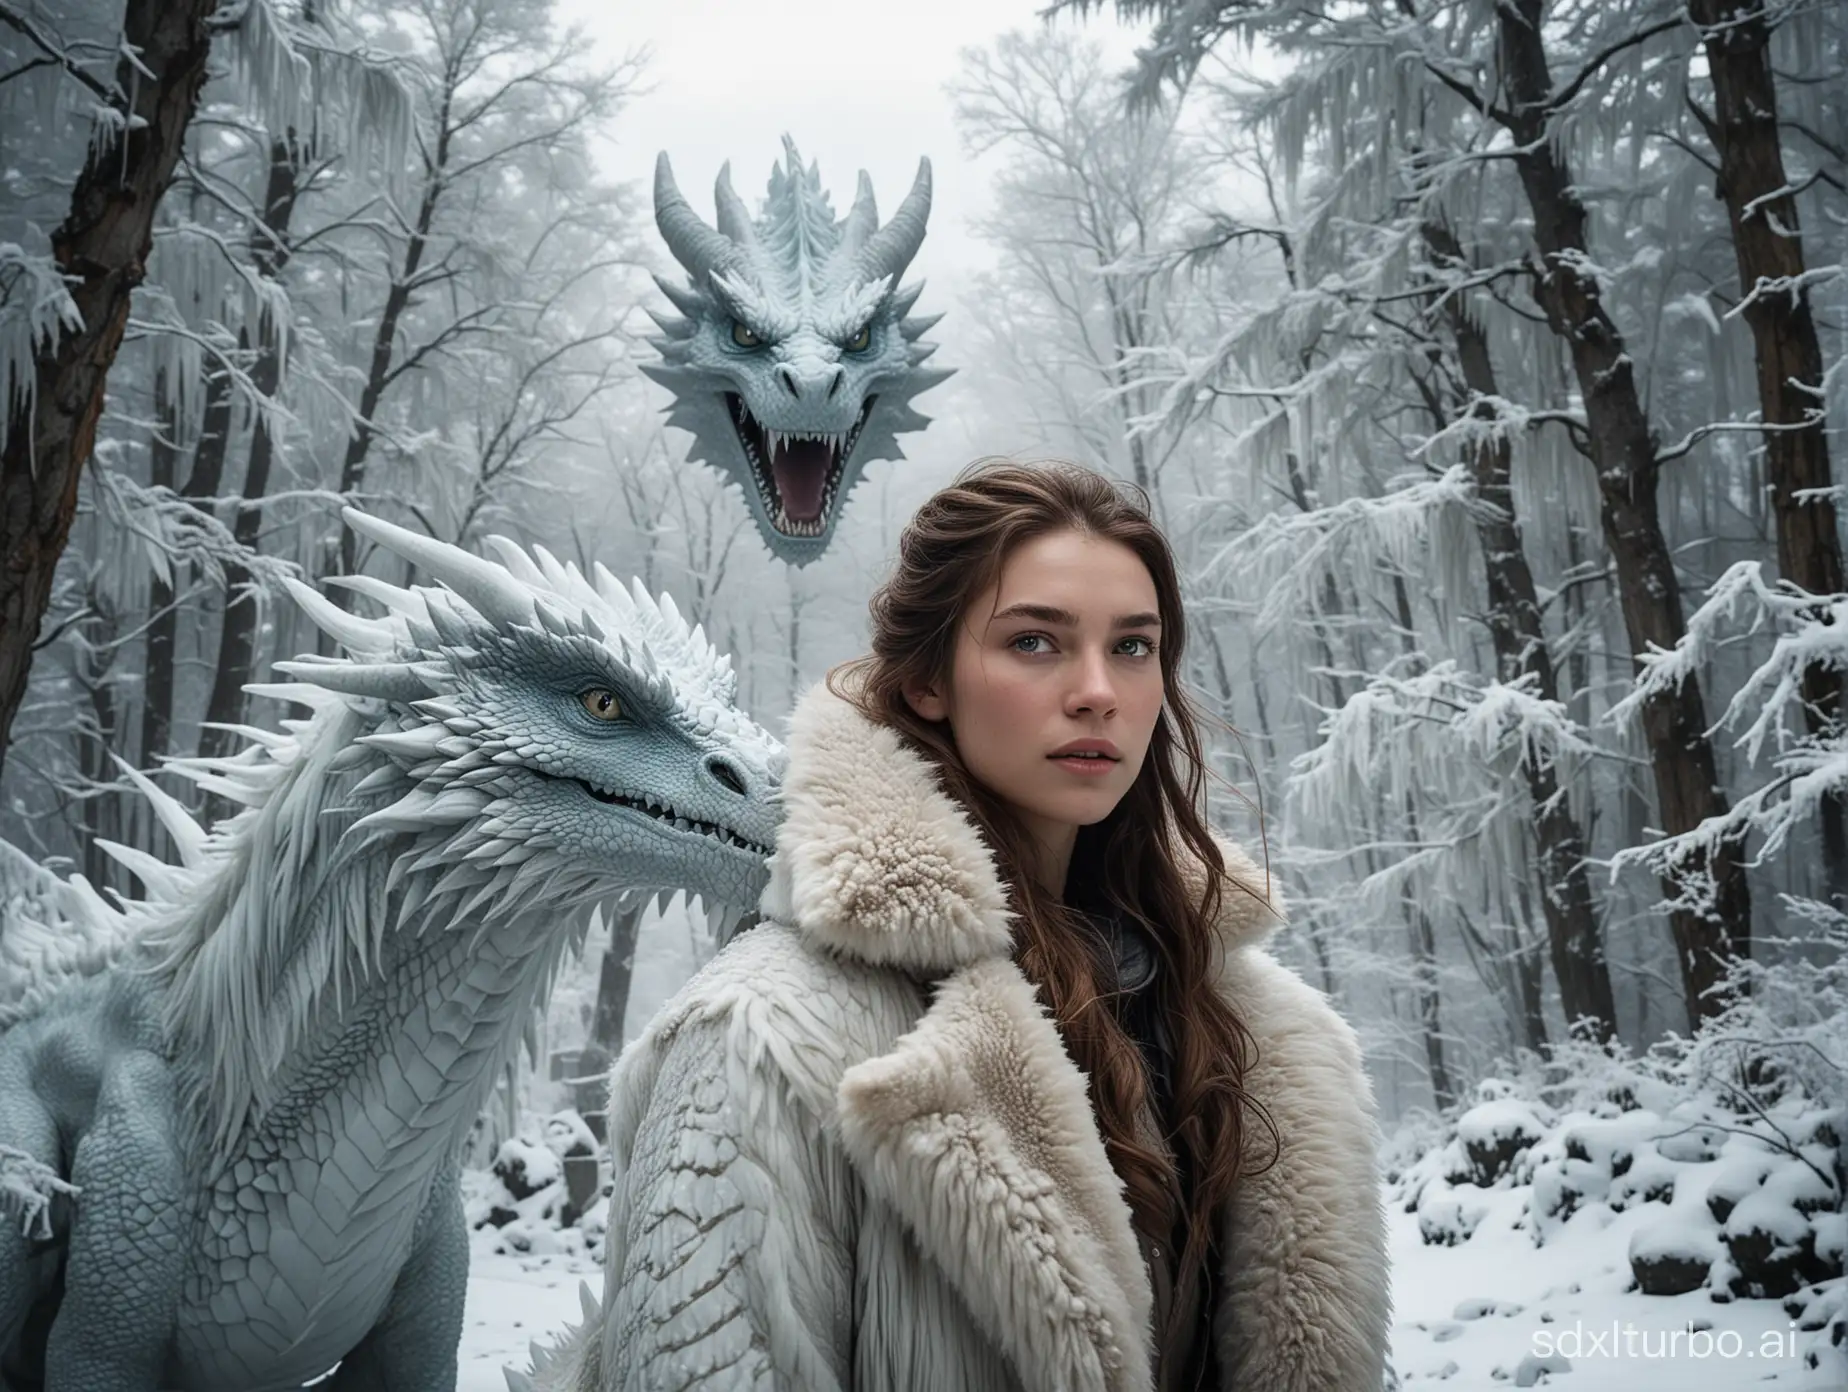 Courageous-Female-Rider-Commands-Majestic-Ice-Dragon-in-Snowy-Landscape